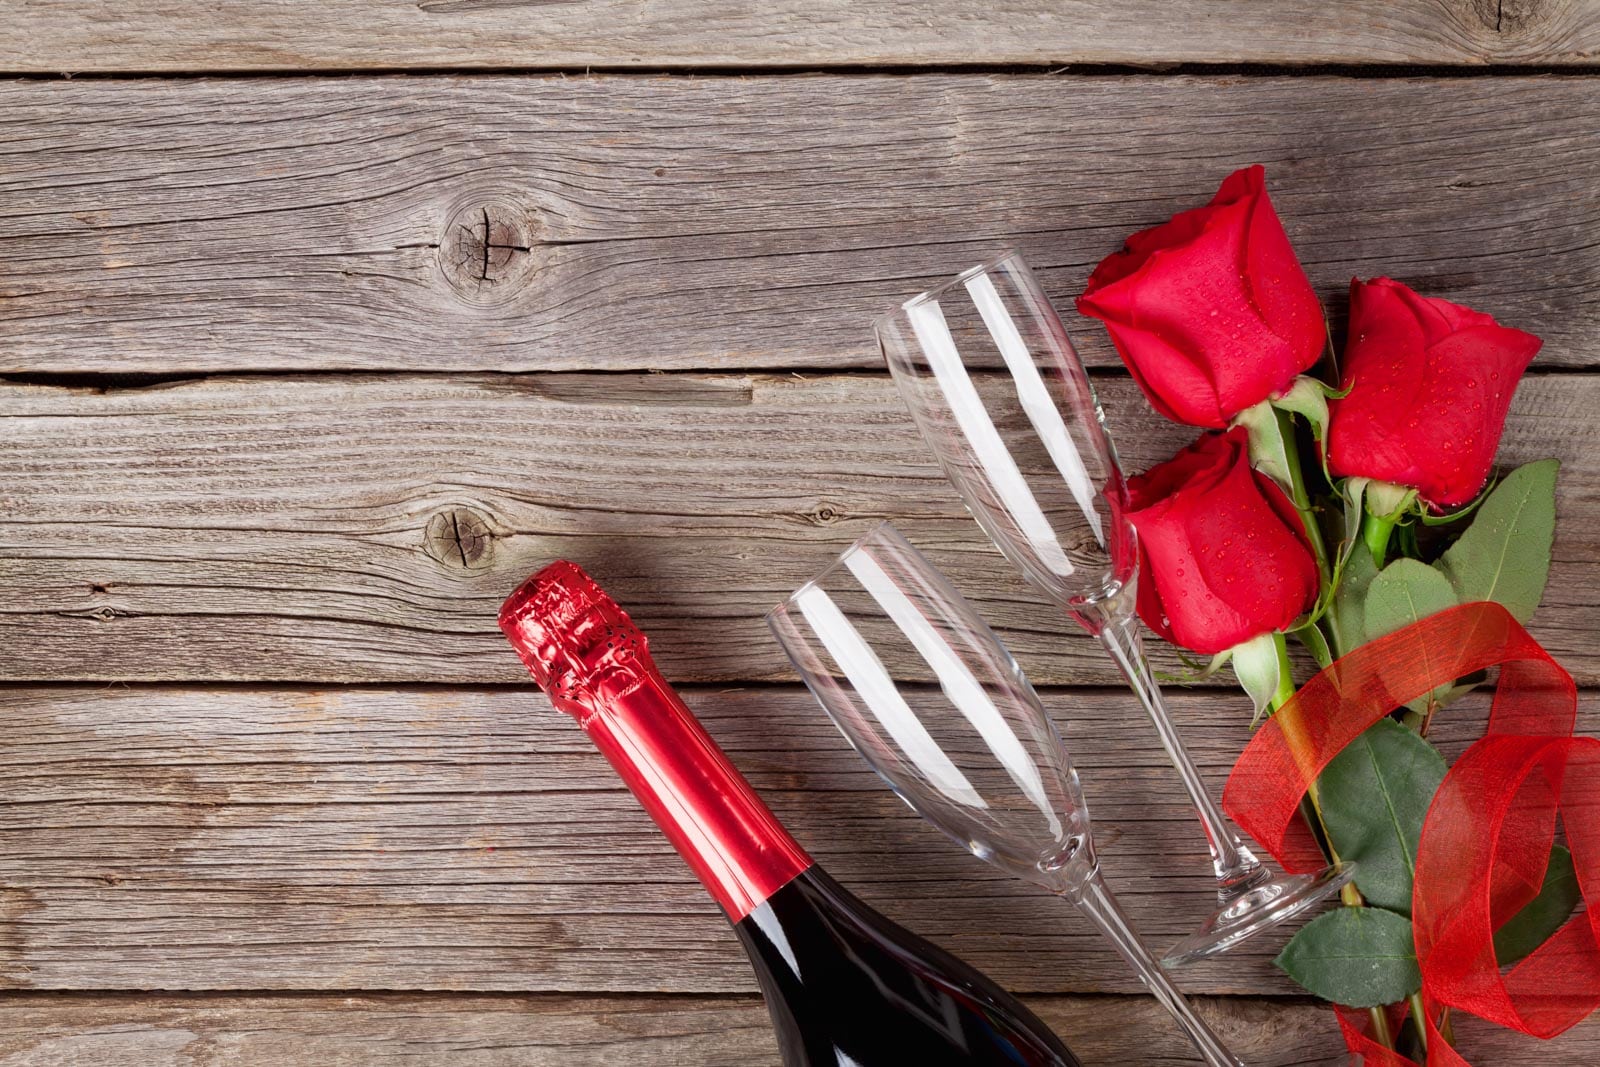 Red roses and a bottle of champagne on a wooden table.